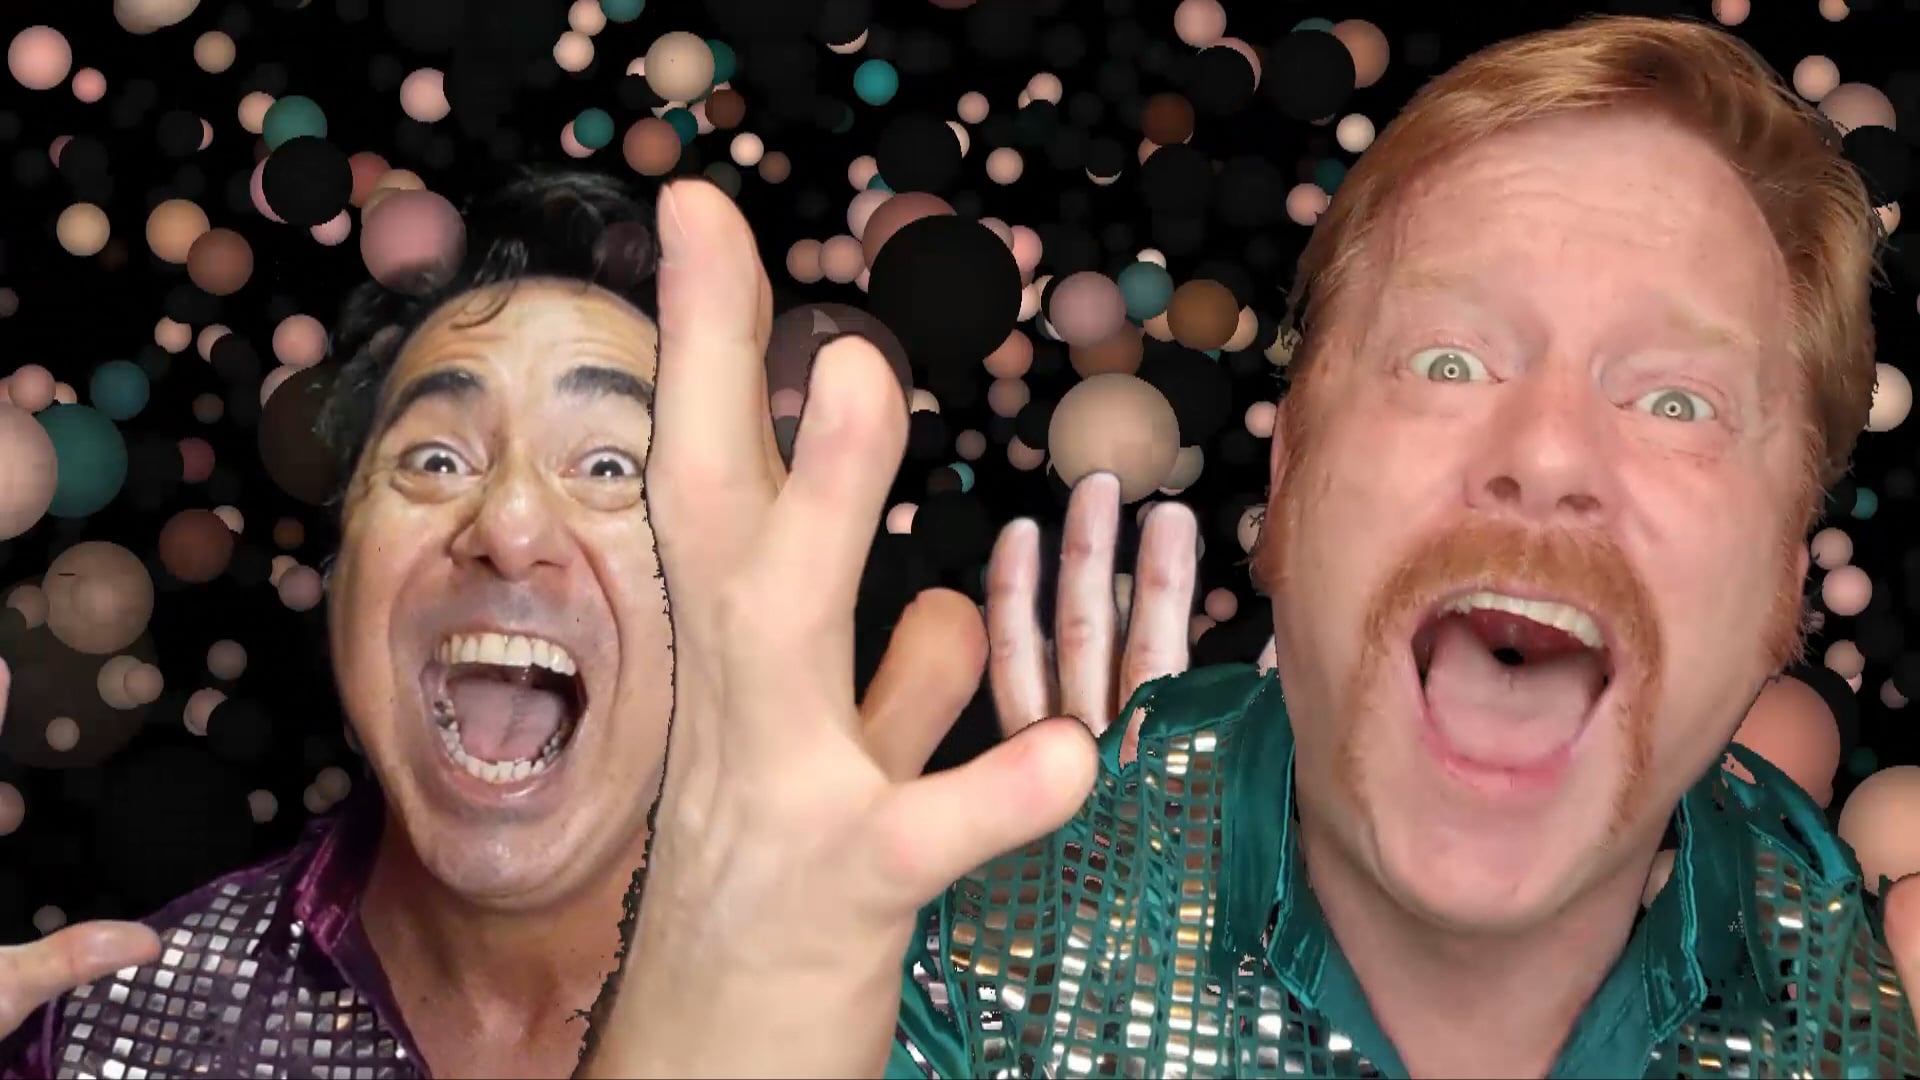 This Anti-Trump Music Video is a Gay Disco Freakout